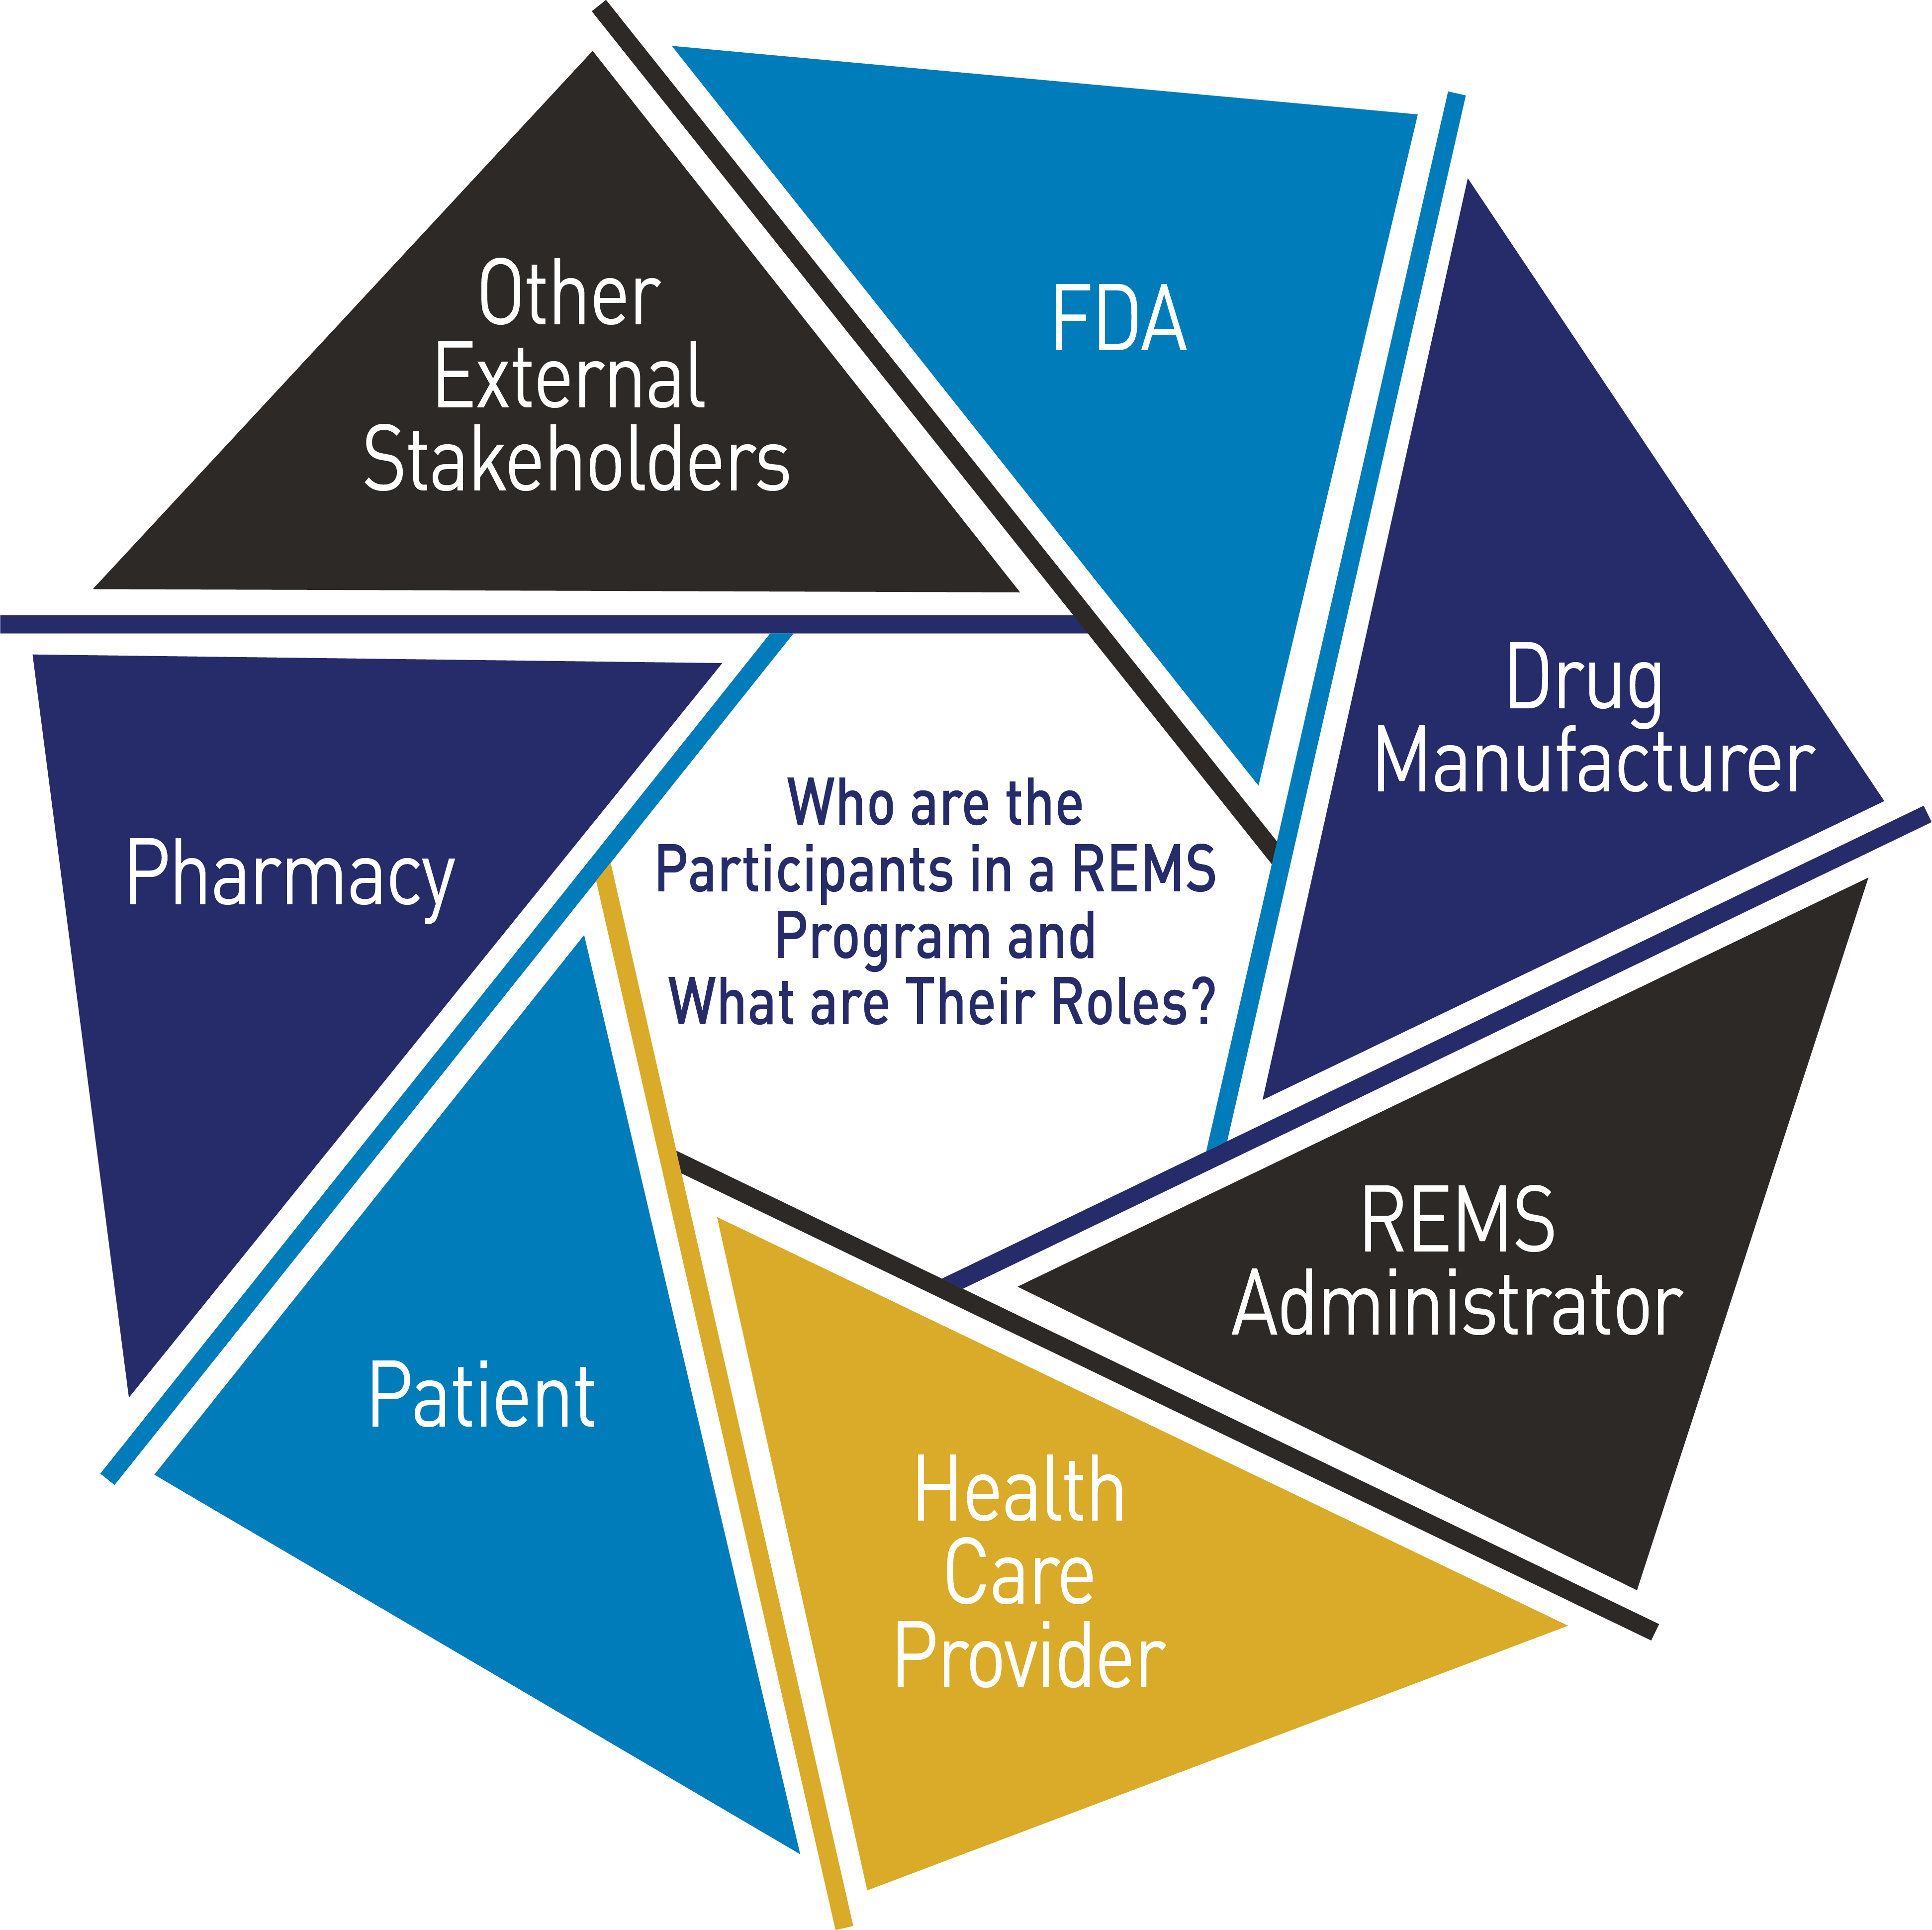 Who are the Participants in a REMS Program and What are Their Roles?